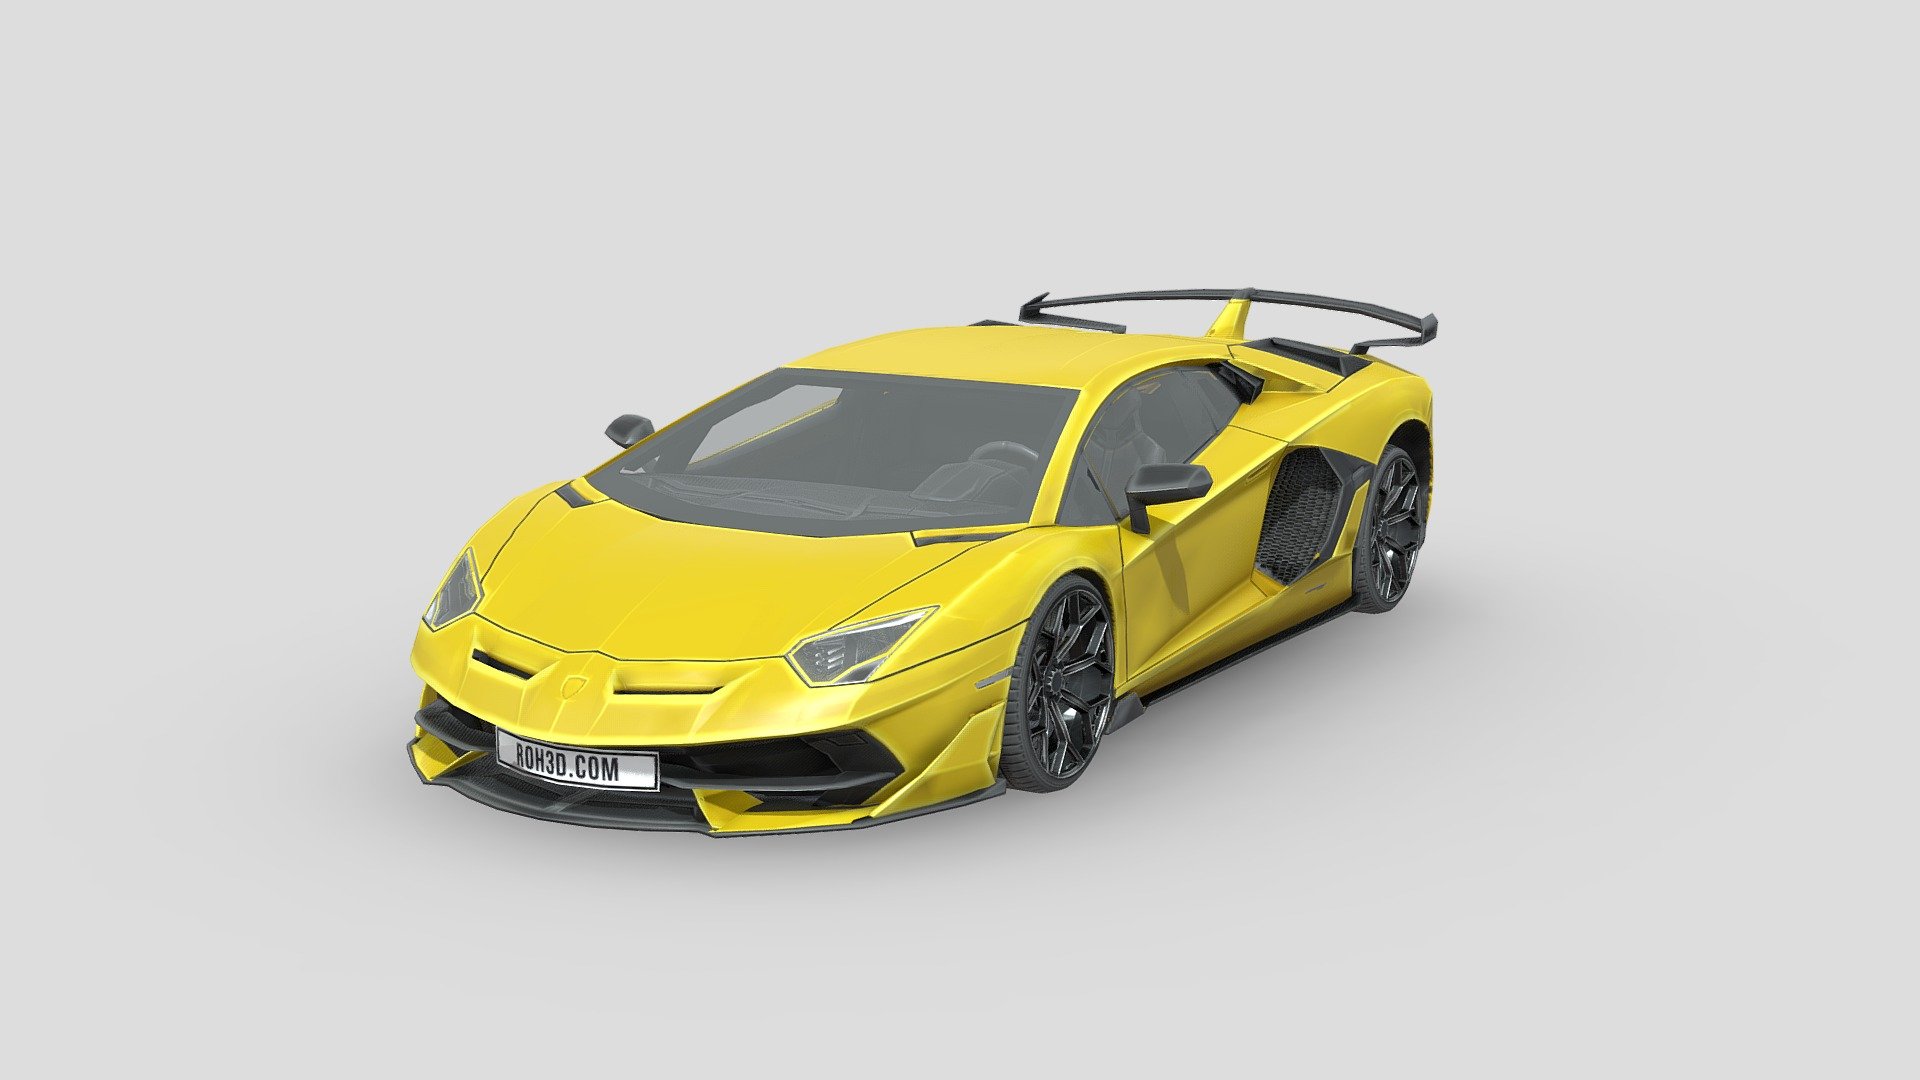 Low Poly Lamborghini Aventador 2019, clean geometry with only 14K polys. It also included PSD files, so you can easily change the color.

The Lamborghini Aventador (Spanish pronunciation: [aβentaˈðoɾ]) is a mid-engine sportscar produced by the Italian automotive manufacturer Lamborghini. In keeping with Lamborghini tradition, the Aventador is named after a Spanish fighting bull that fought in Zaragoza, Aragón in 1993. The Aventador is the successor for the Murciélago and is made by hand in Sant'Agata Bolognese, Italy.

Launched on 28 February 2011 at the Geneva Motor Show, five months after its initial unveiling in Sant'Agata Bolognese, the vehicle, internally codenamed LB834, was designed to replace the then-decade-old Murciélago as the new flagship model.

Soon after the Aventador's unveiling, Lamborghini announced that it had sold 12 cars, with deliveries starting in the second half of 2011. By March 2016, Lamborghini had built 5,000 Aventadors, in five years.

Source: Wikipedia - Low Poly Car - Lamborghini Aventador SVJ 2019 - Buy Royalty Free 3D model by ROH3D 3d model